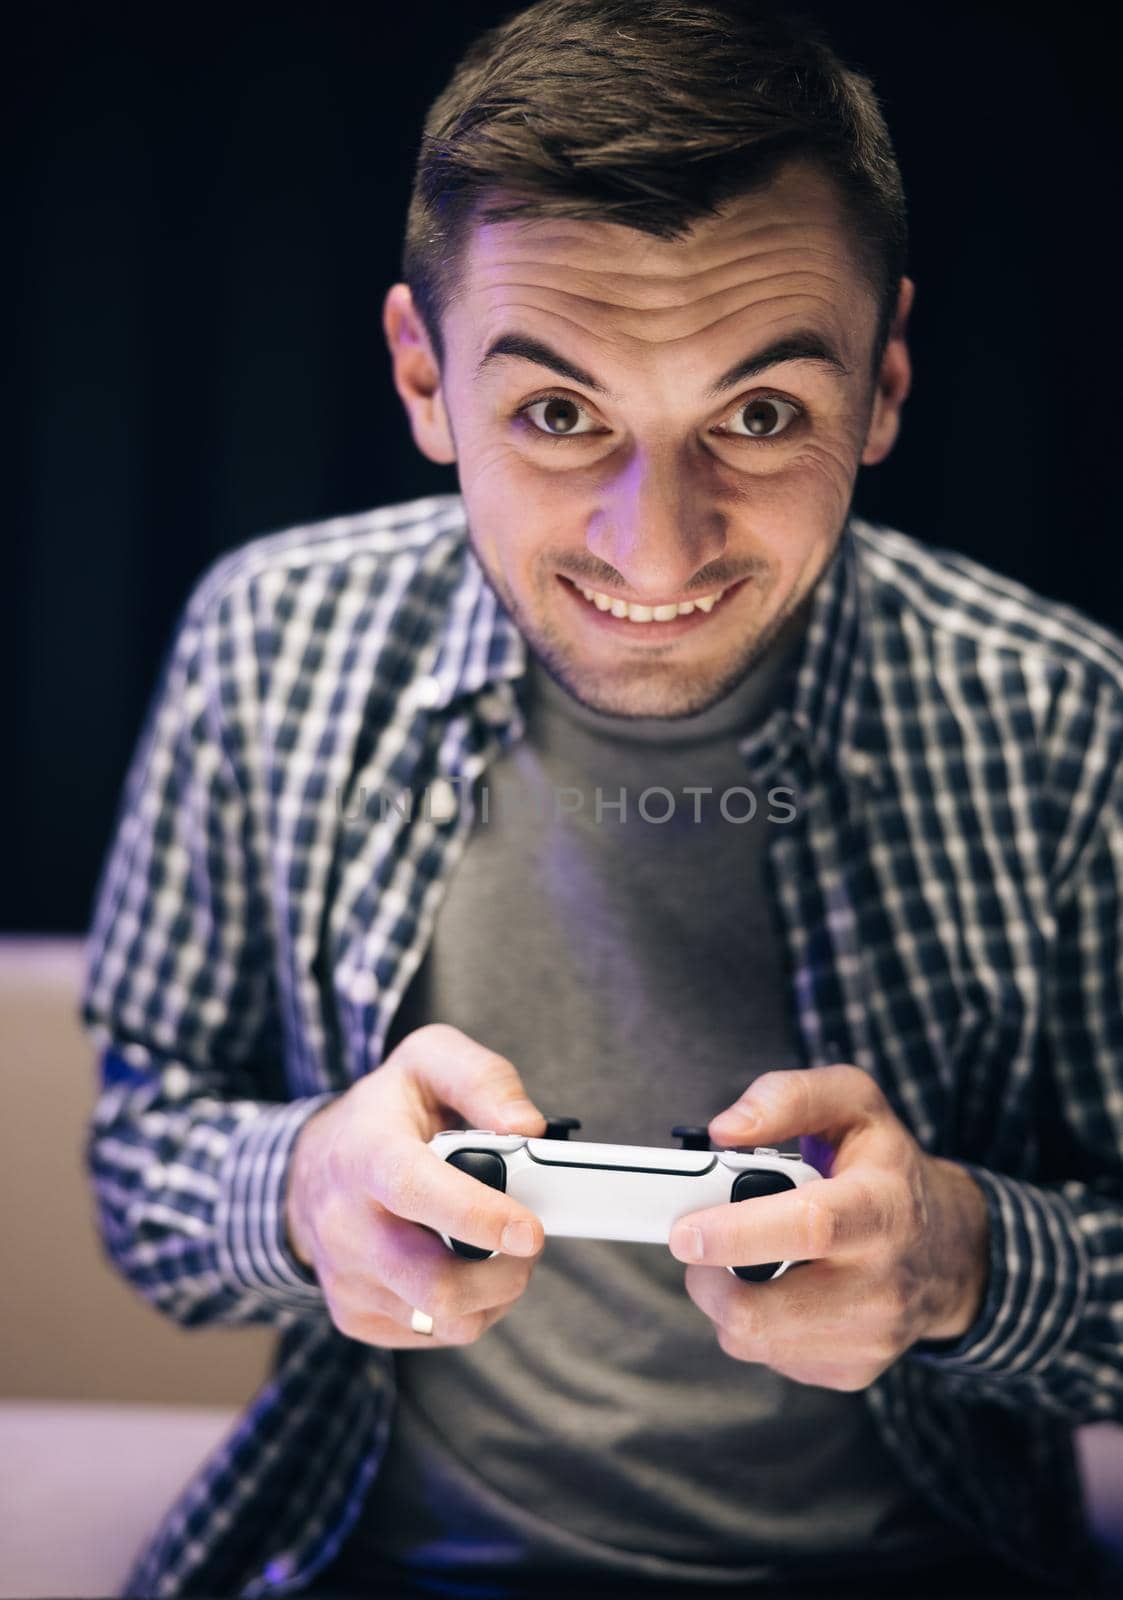 Man in casual wear playing video game in home living room. Caucasian guy holding joystick control having fun laughing on couch indoors by uflypro